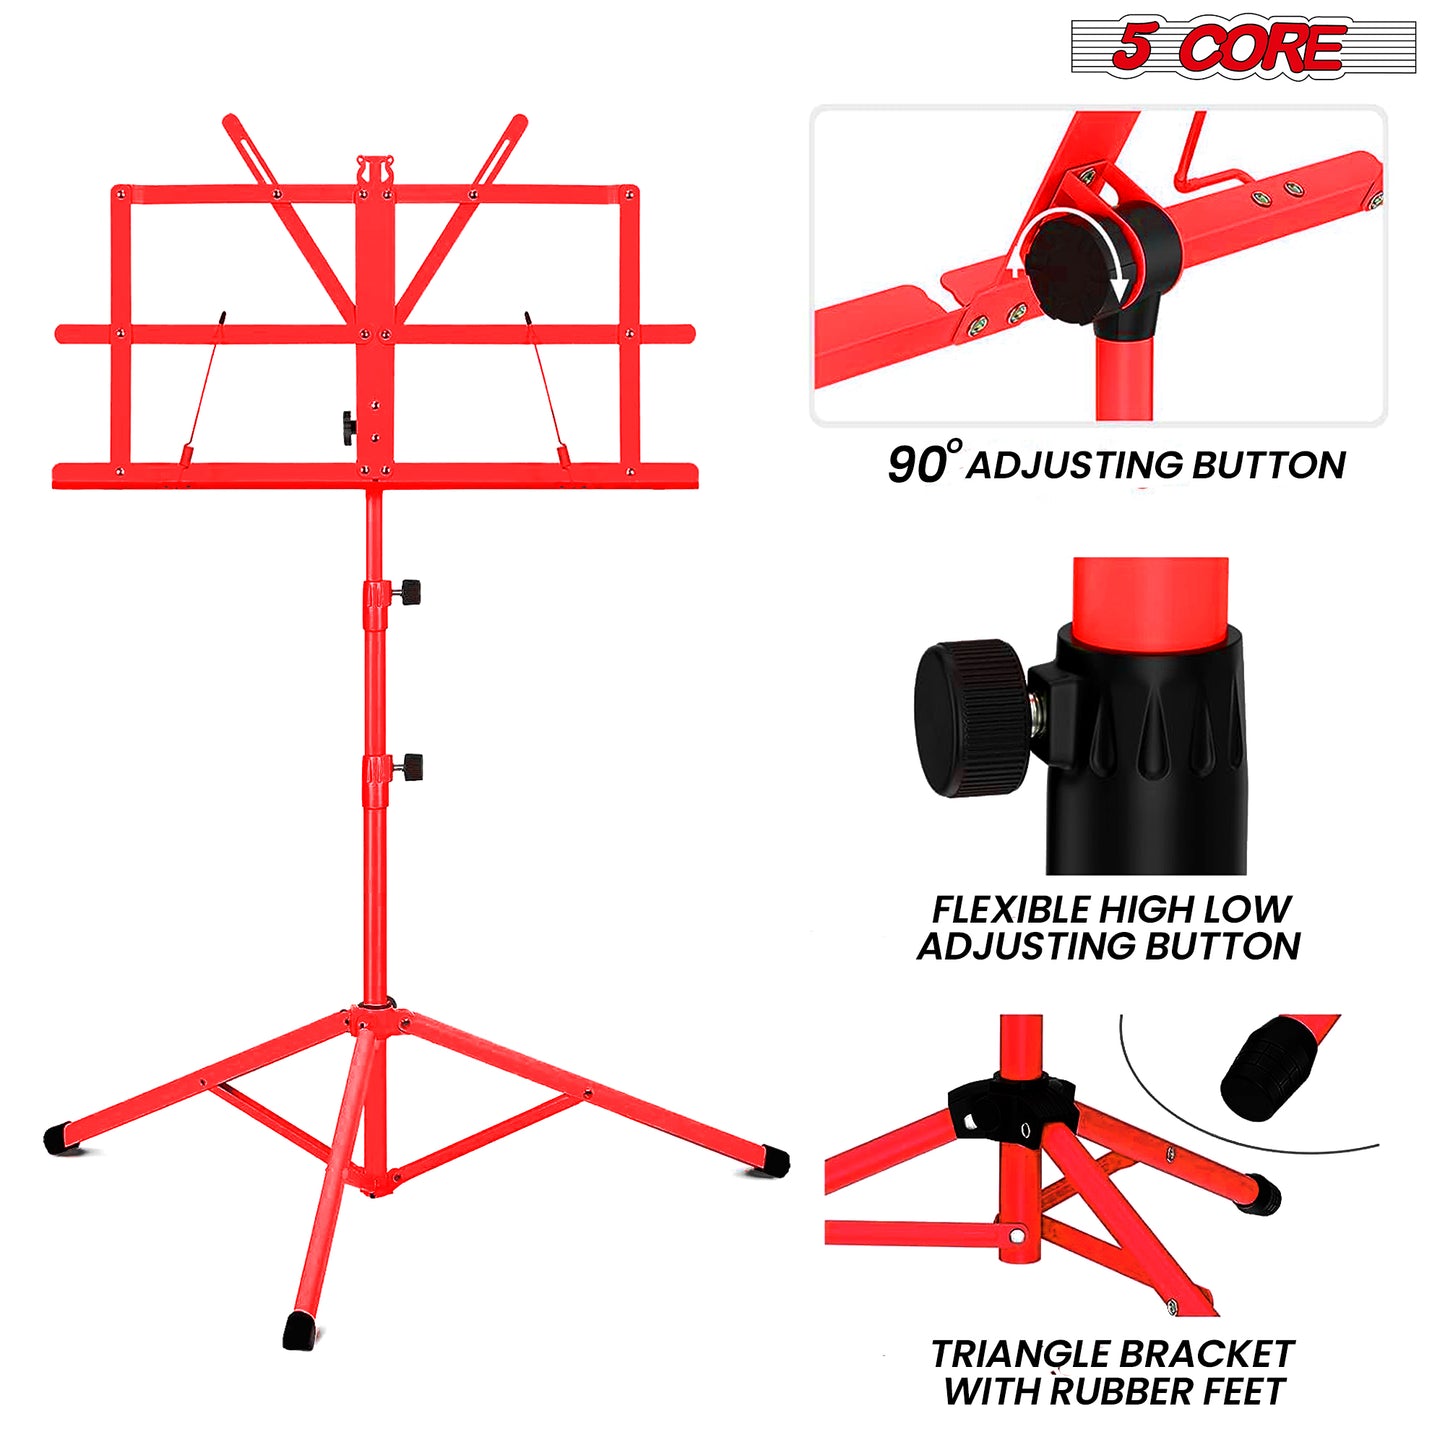 5 Core Music Stand, 2 in 1 Dual-Use Adjustable Folding Sheet Stand Red / Metal Build Portable Sheet Holder / Carrying Bag, Music Clip and Stand Light Included - MUS FLD RED